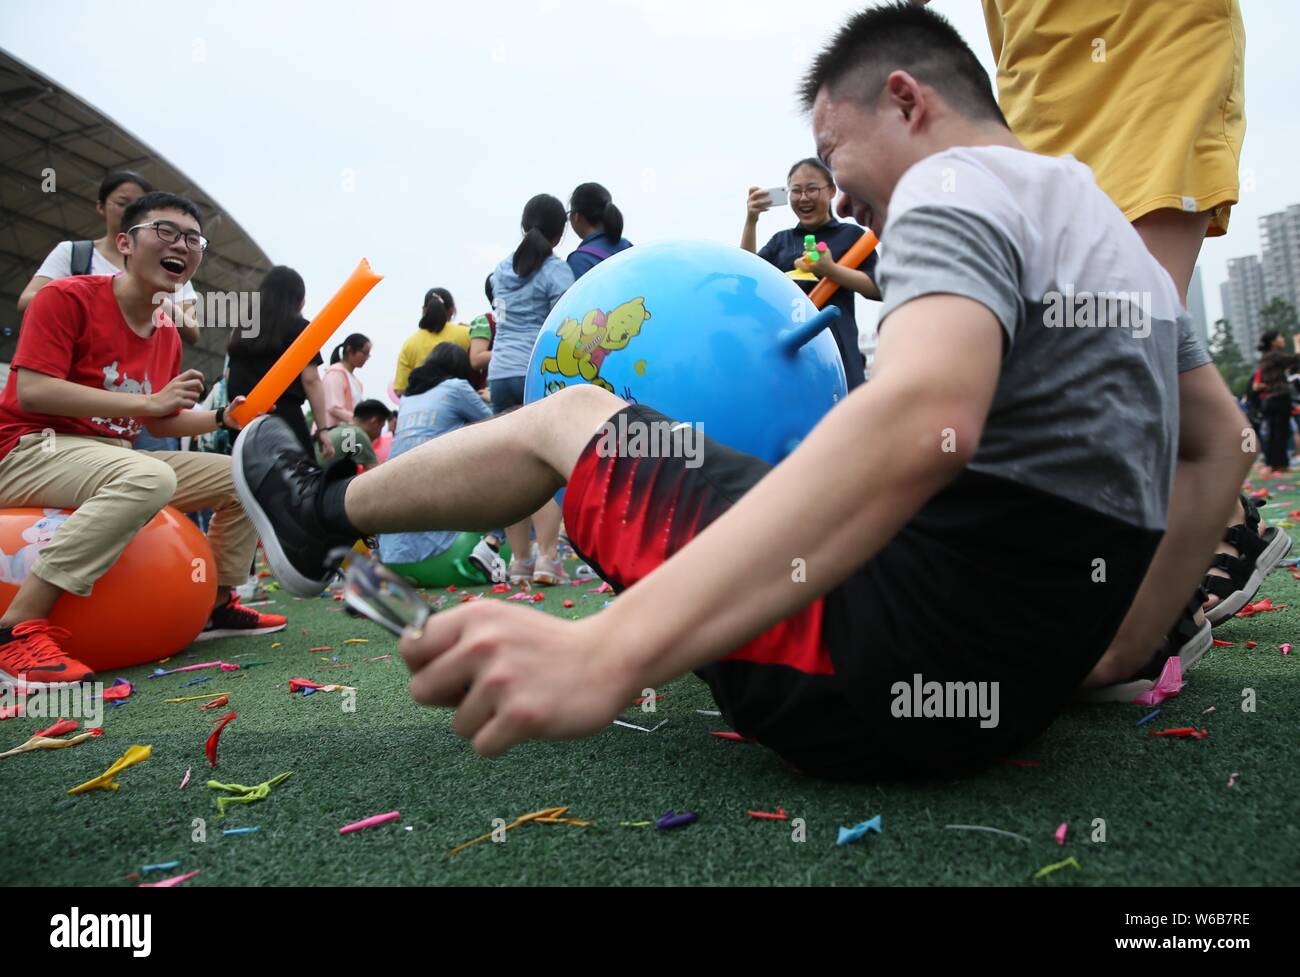 Senior high school students relieve stress by smashing balloons before the 2018 national college entrance examination, also known as Gaokao, at No.1 H Stock Photo